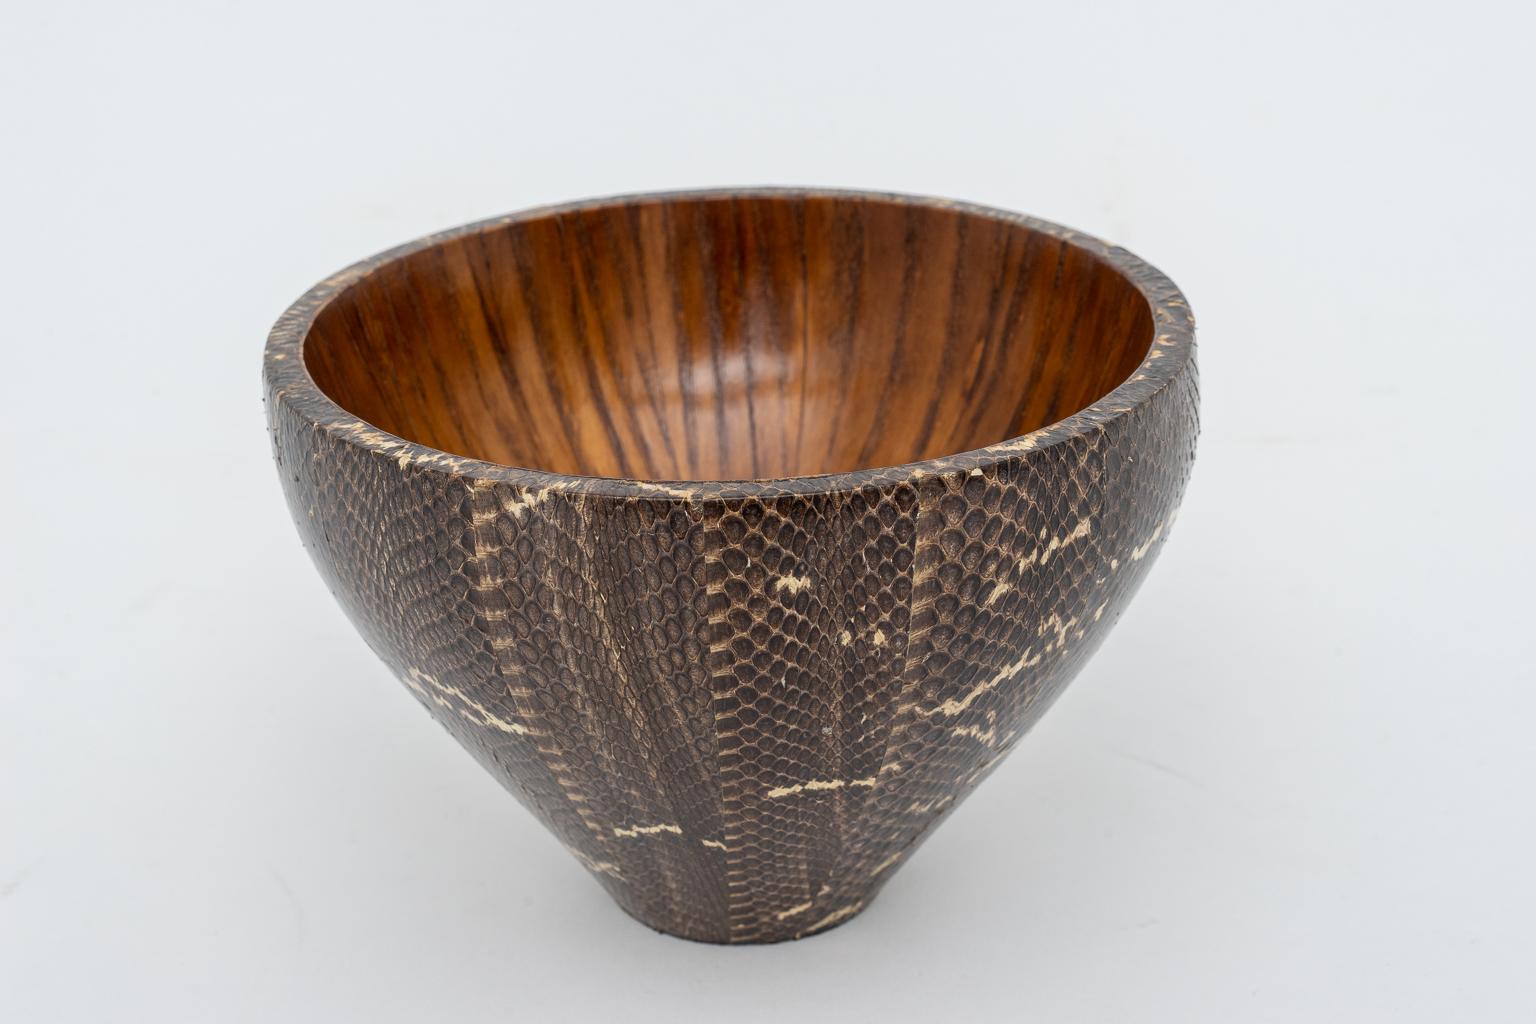 This stylish and chic vase has an interior of mahogany with an exterior wrapped in snake skin and it was created by R&Y Agousti in the 1990s.